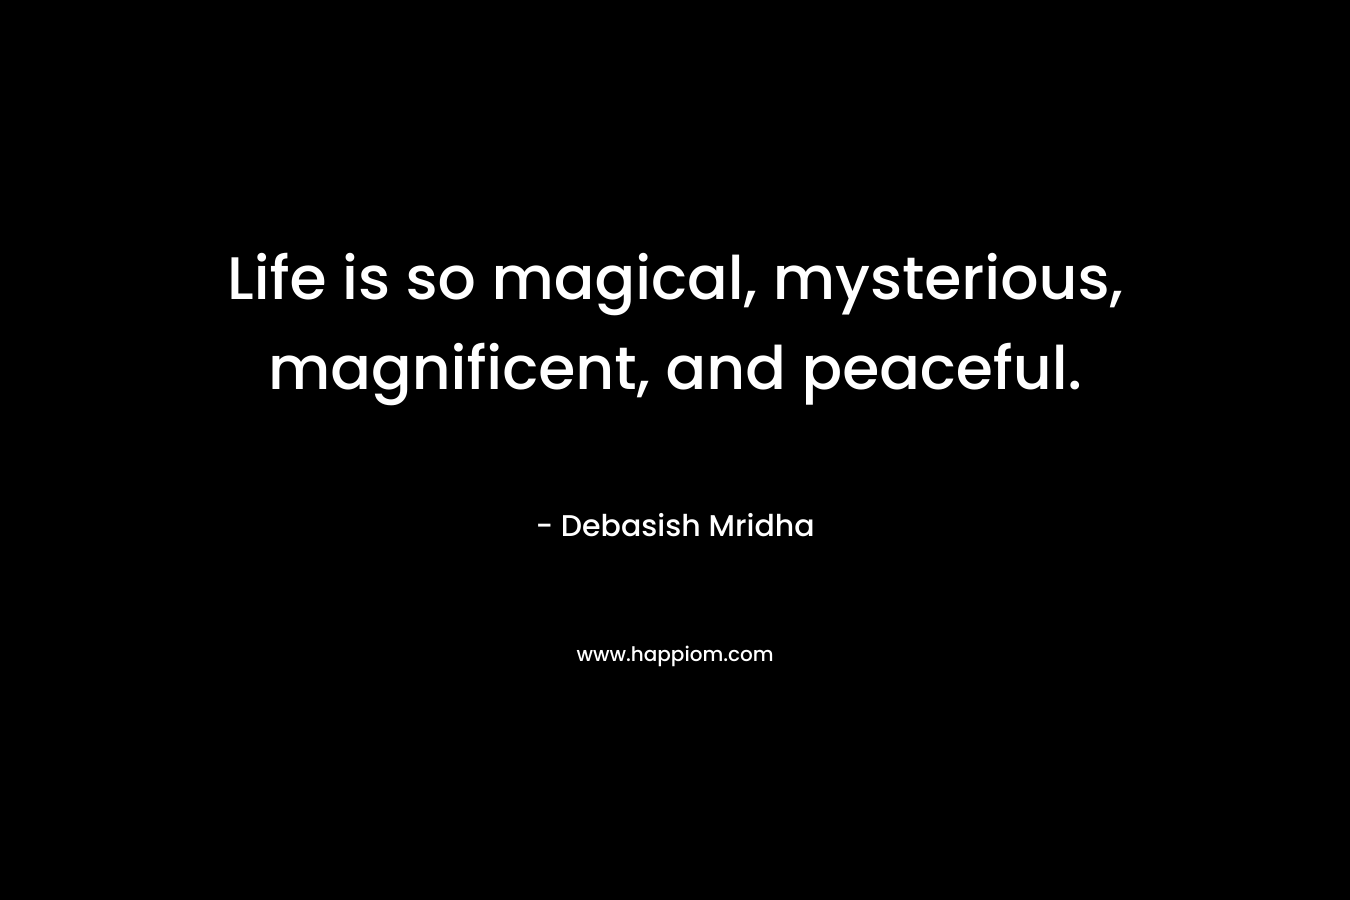 Life is so magical, mysterious, magnificent, and peaceful.